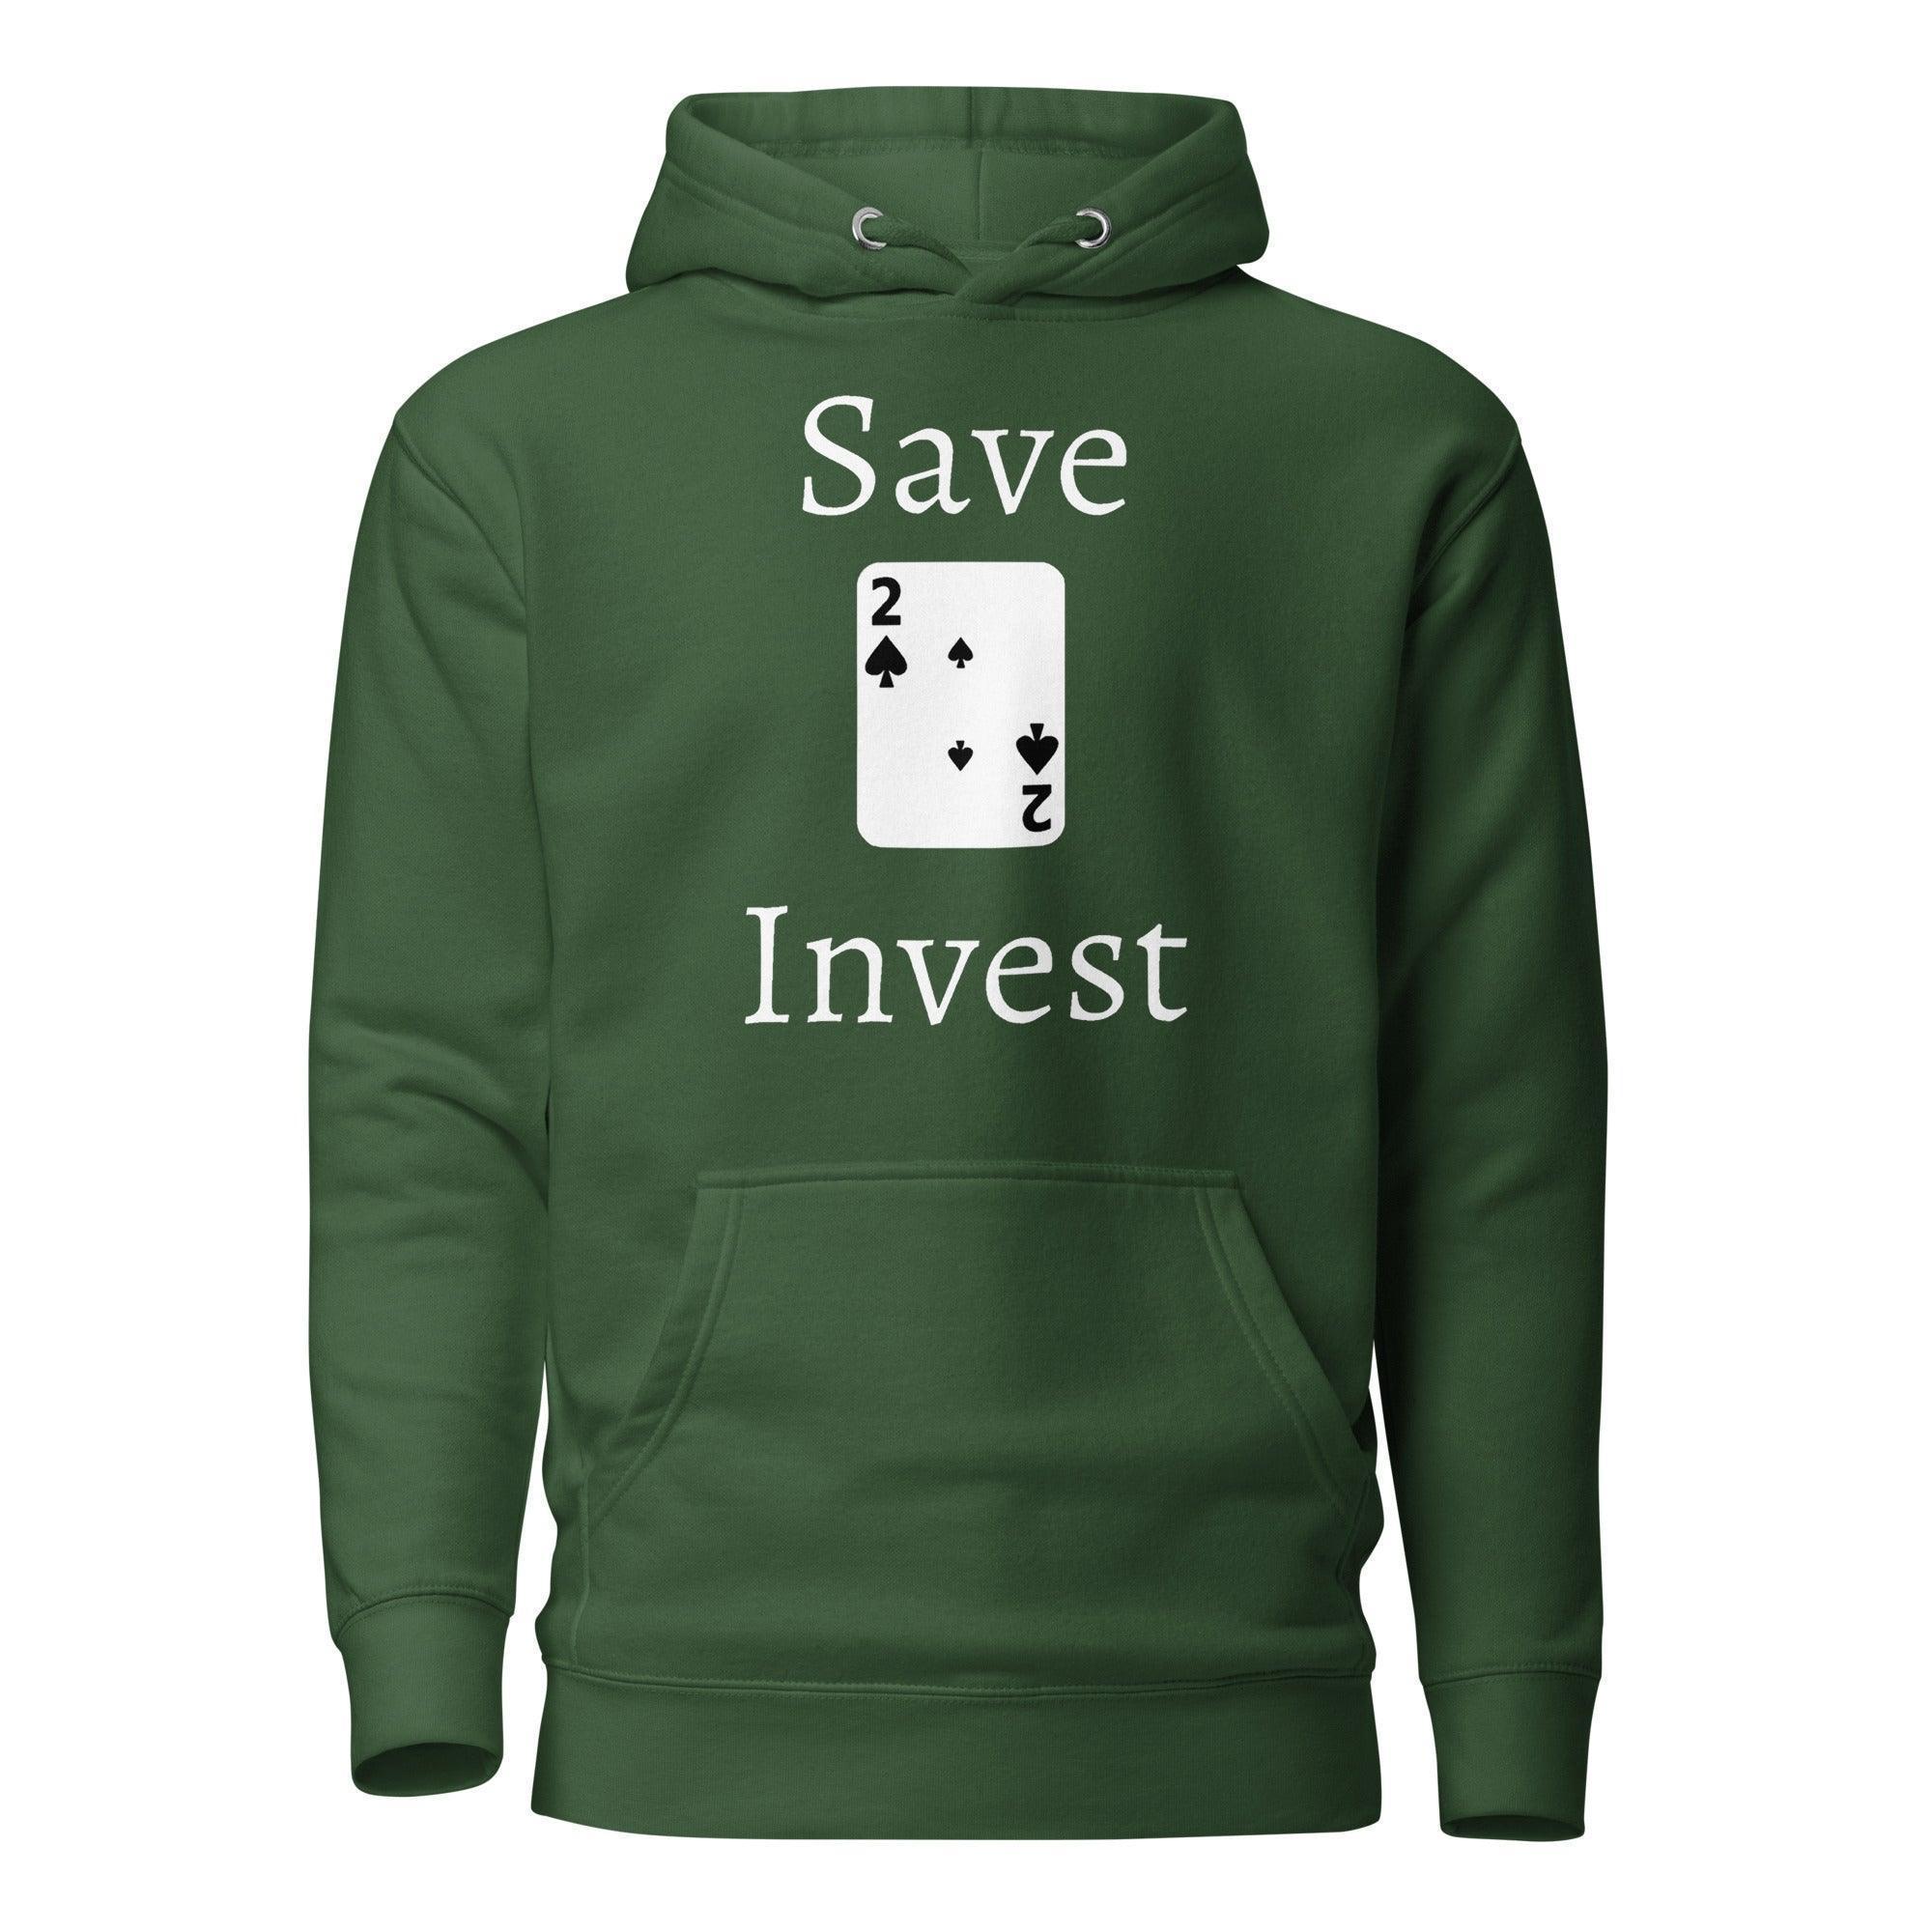 Save 2 Invest Pullover Hoodie - InvestmenTees